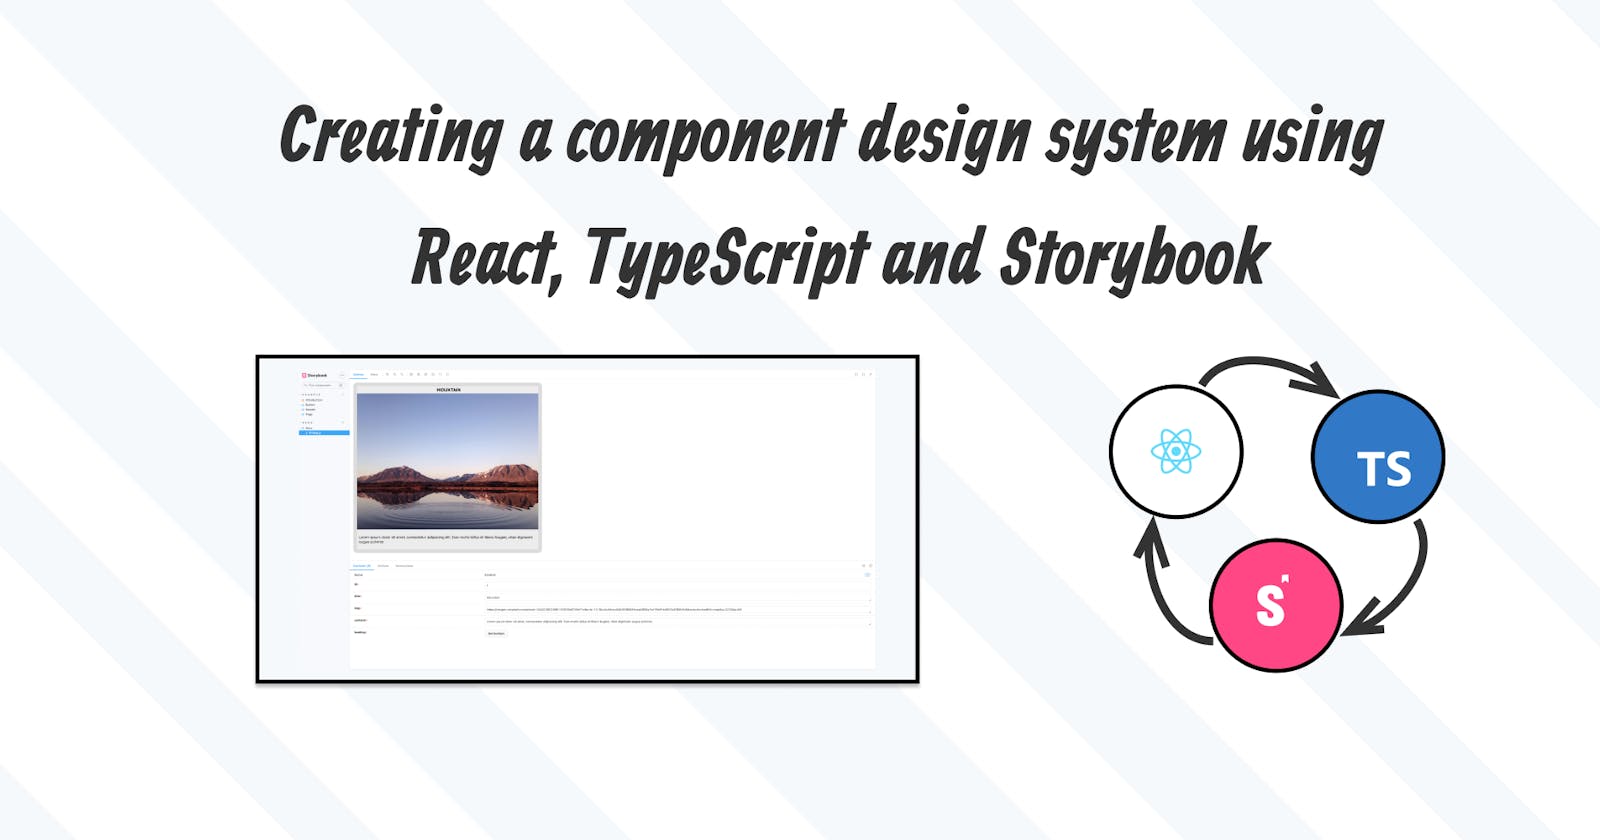 Creating a component design system using React, TypeScript and Storybook